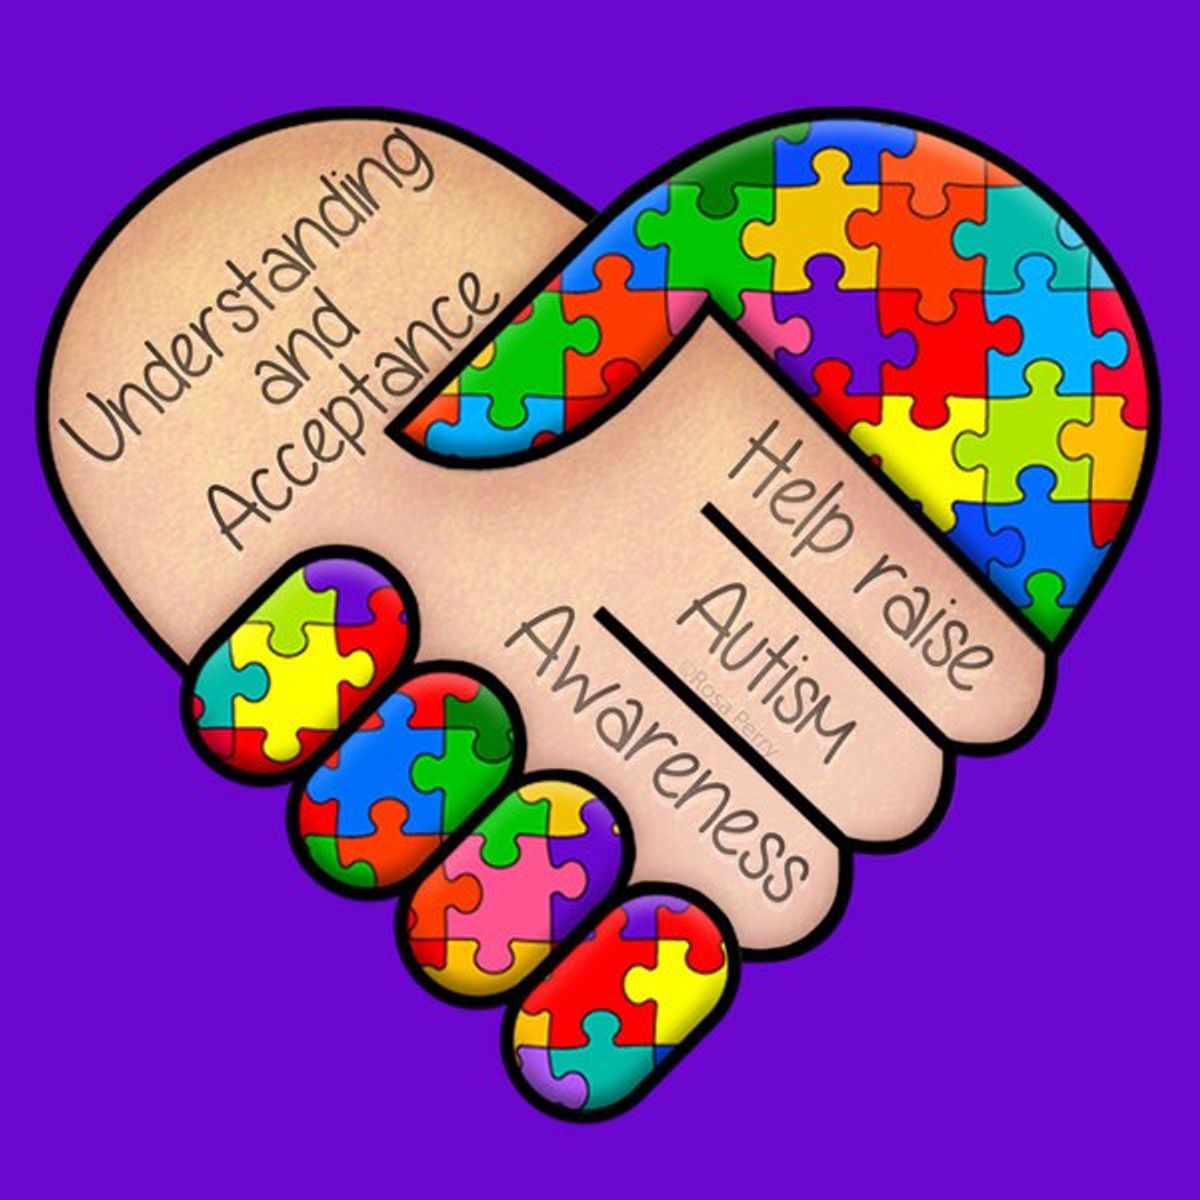 Autism Awareness Day: A Thank You Letter From Someone With Asperger's